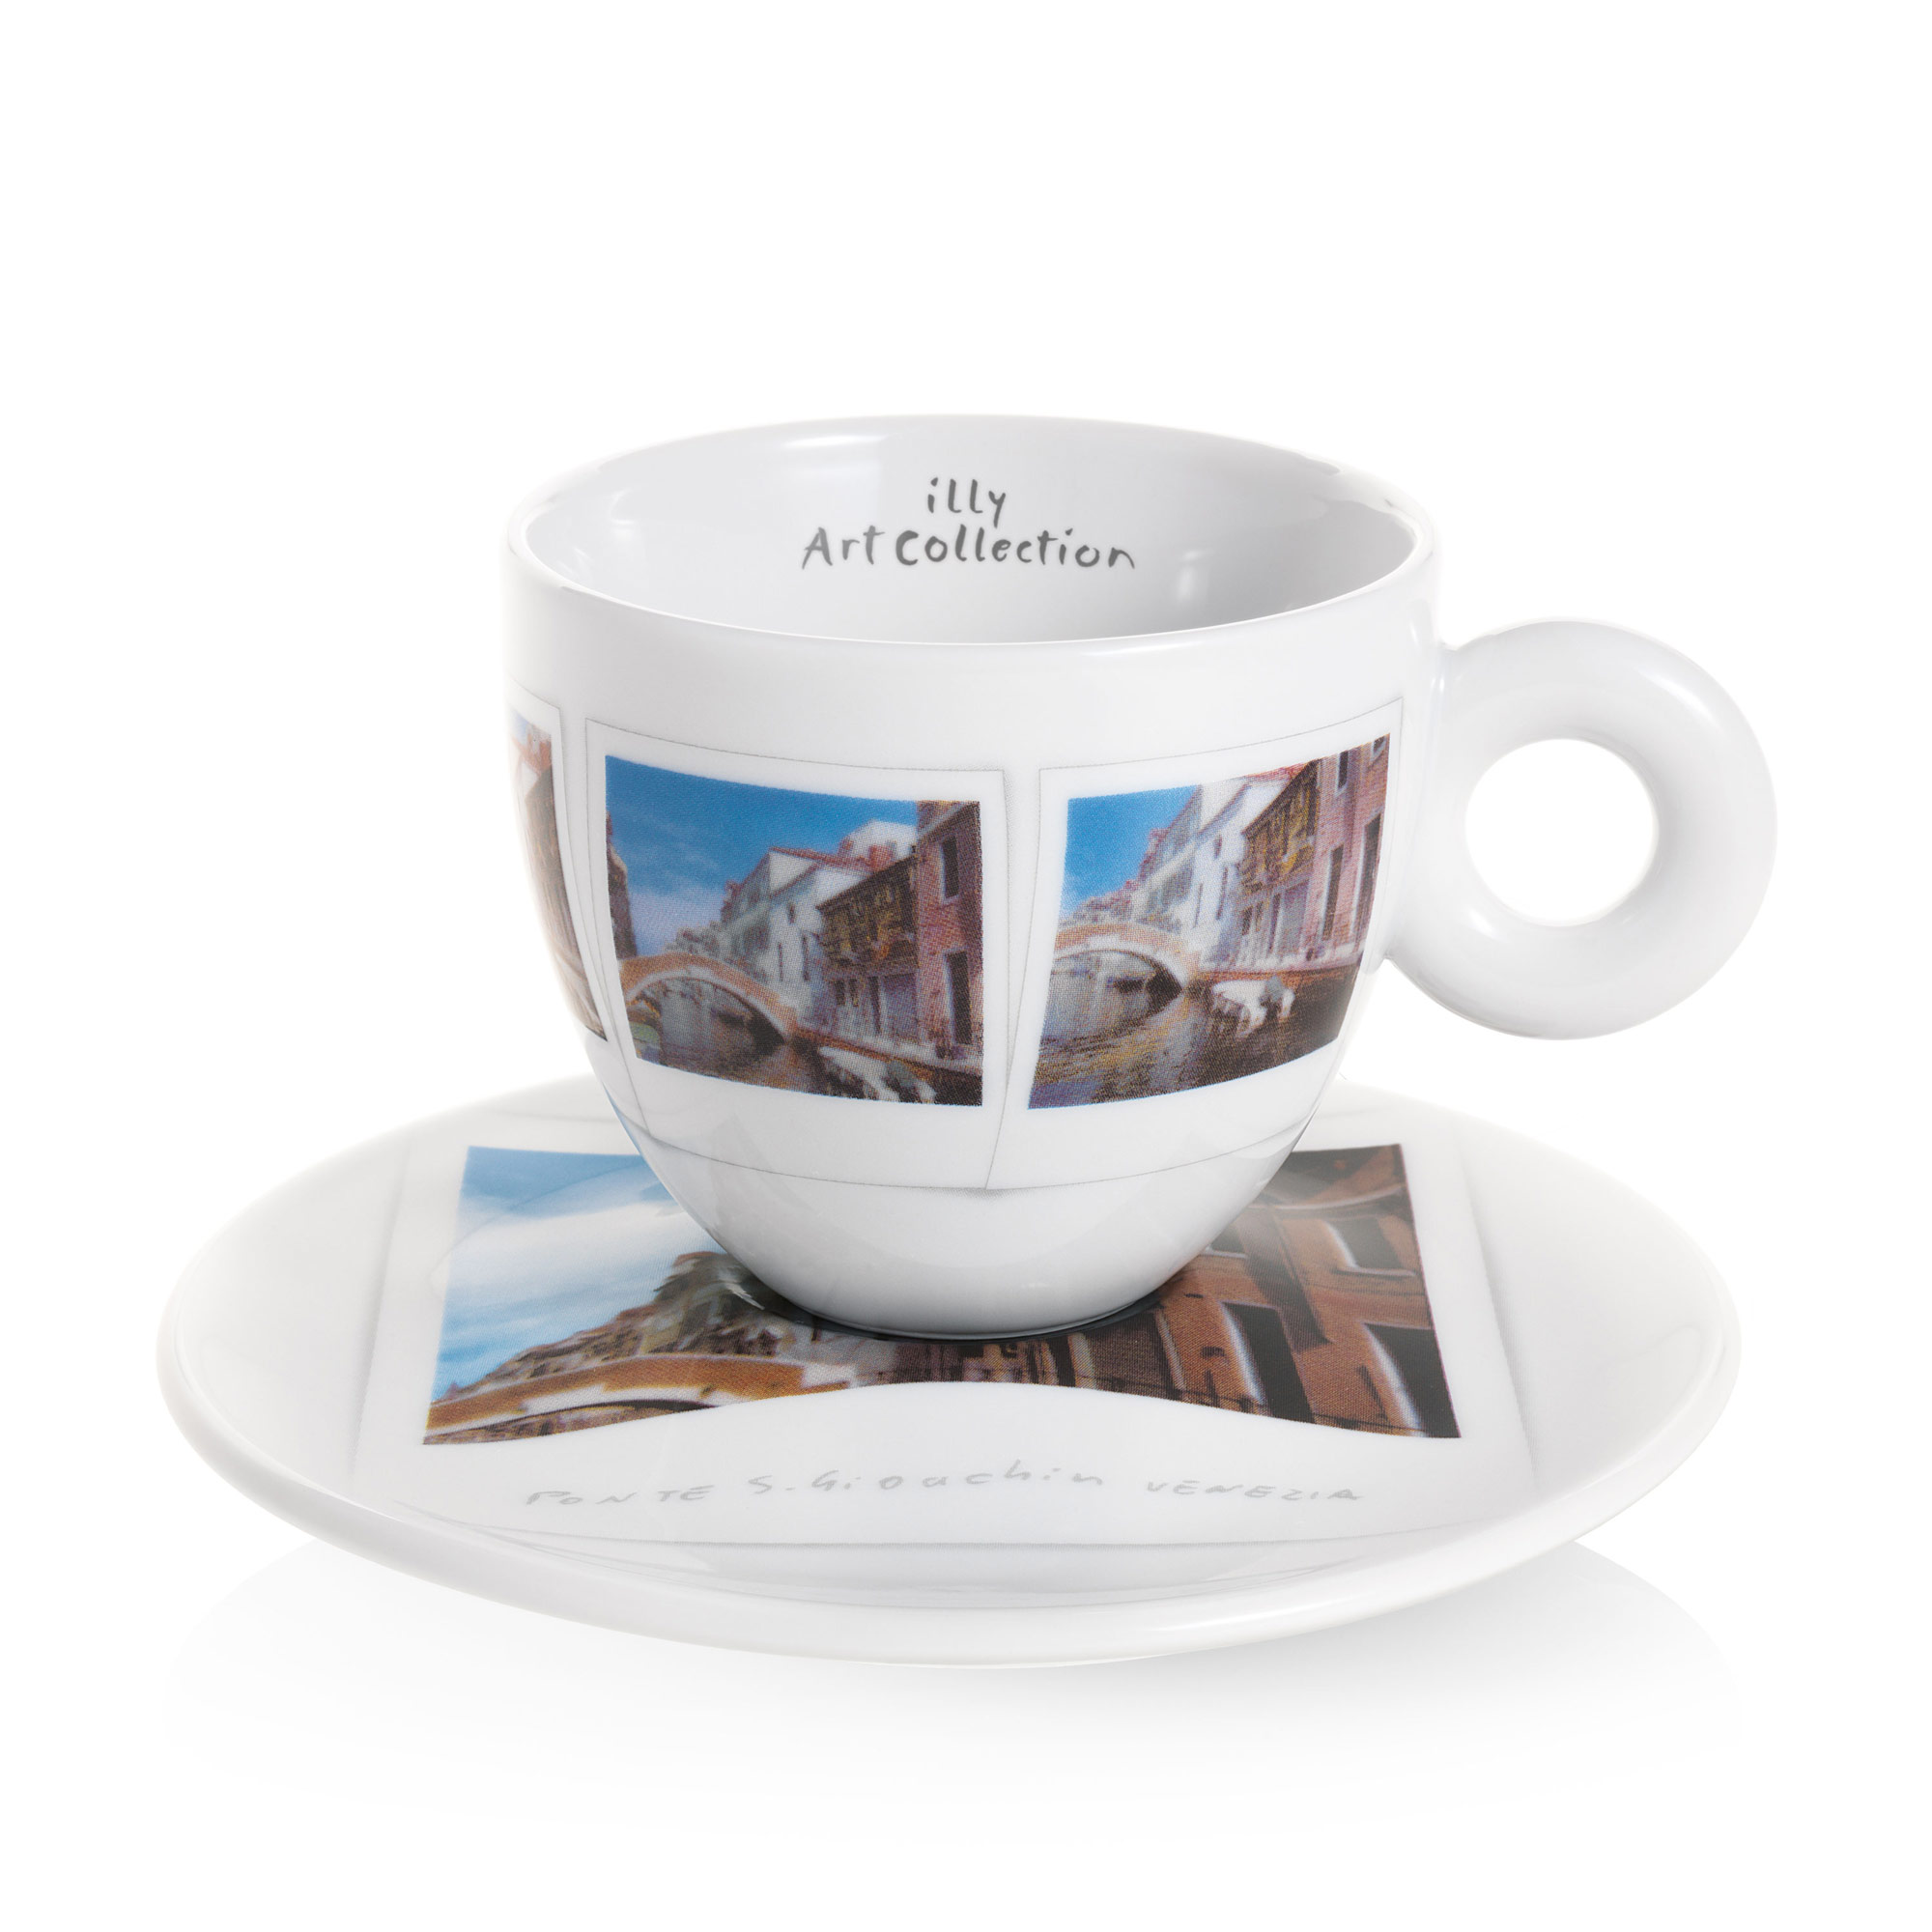 illy Art Collection Maurizio Galimberti Cappuccino Cup